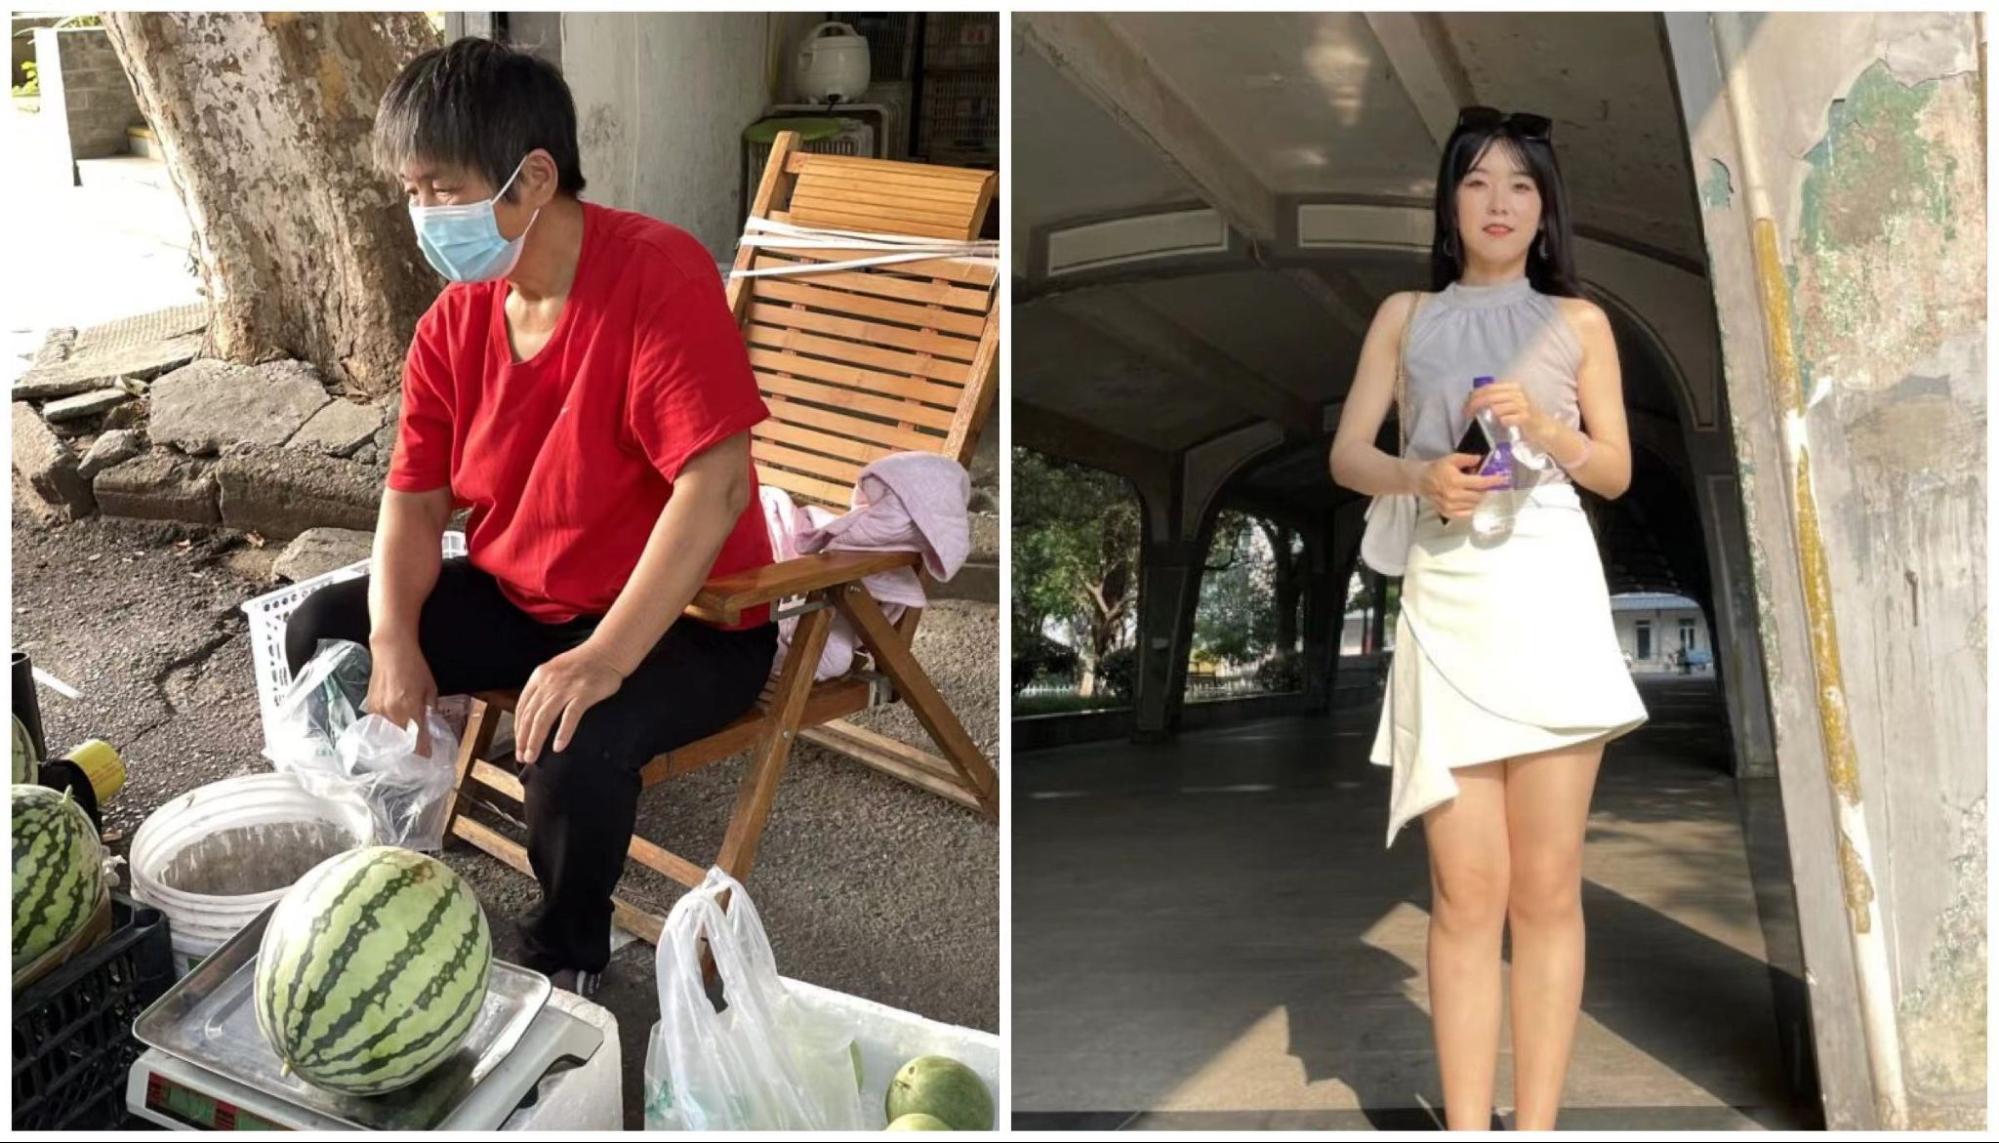 Photos of Zhang's interviewees: a watermelon vender on the left and a grad student on the right. 